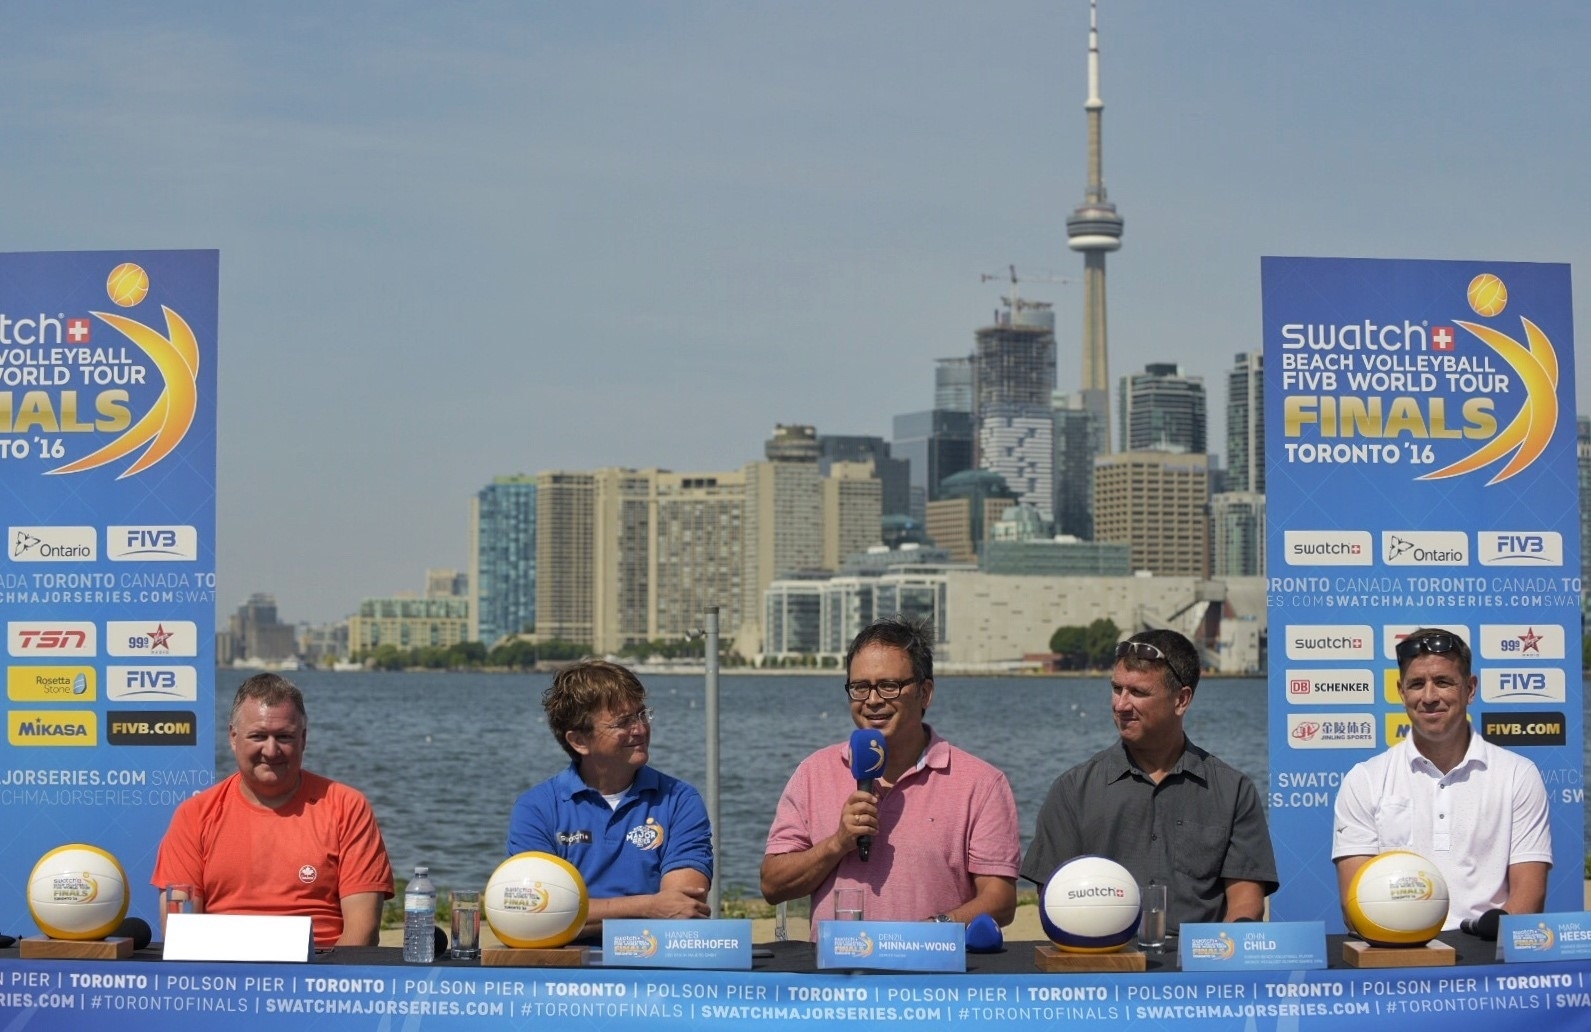 Mark Eckert (President Canadian Volleyball Federation), Hannes Jagerhofer (CEO Beach Majors GmbH), Denzil Minnan-Wong (Toronto City Councillor), John Child (Olympic bronze medalist), Mark Heese (Olympic bronze medalist), pictured at Thursday's press conference to unveil Toronto as the host city for the Swatch Beach Volleyball FIVB World Tour Finals 2016.